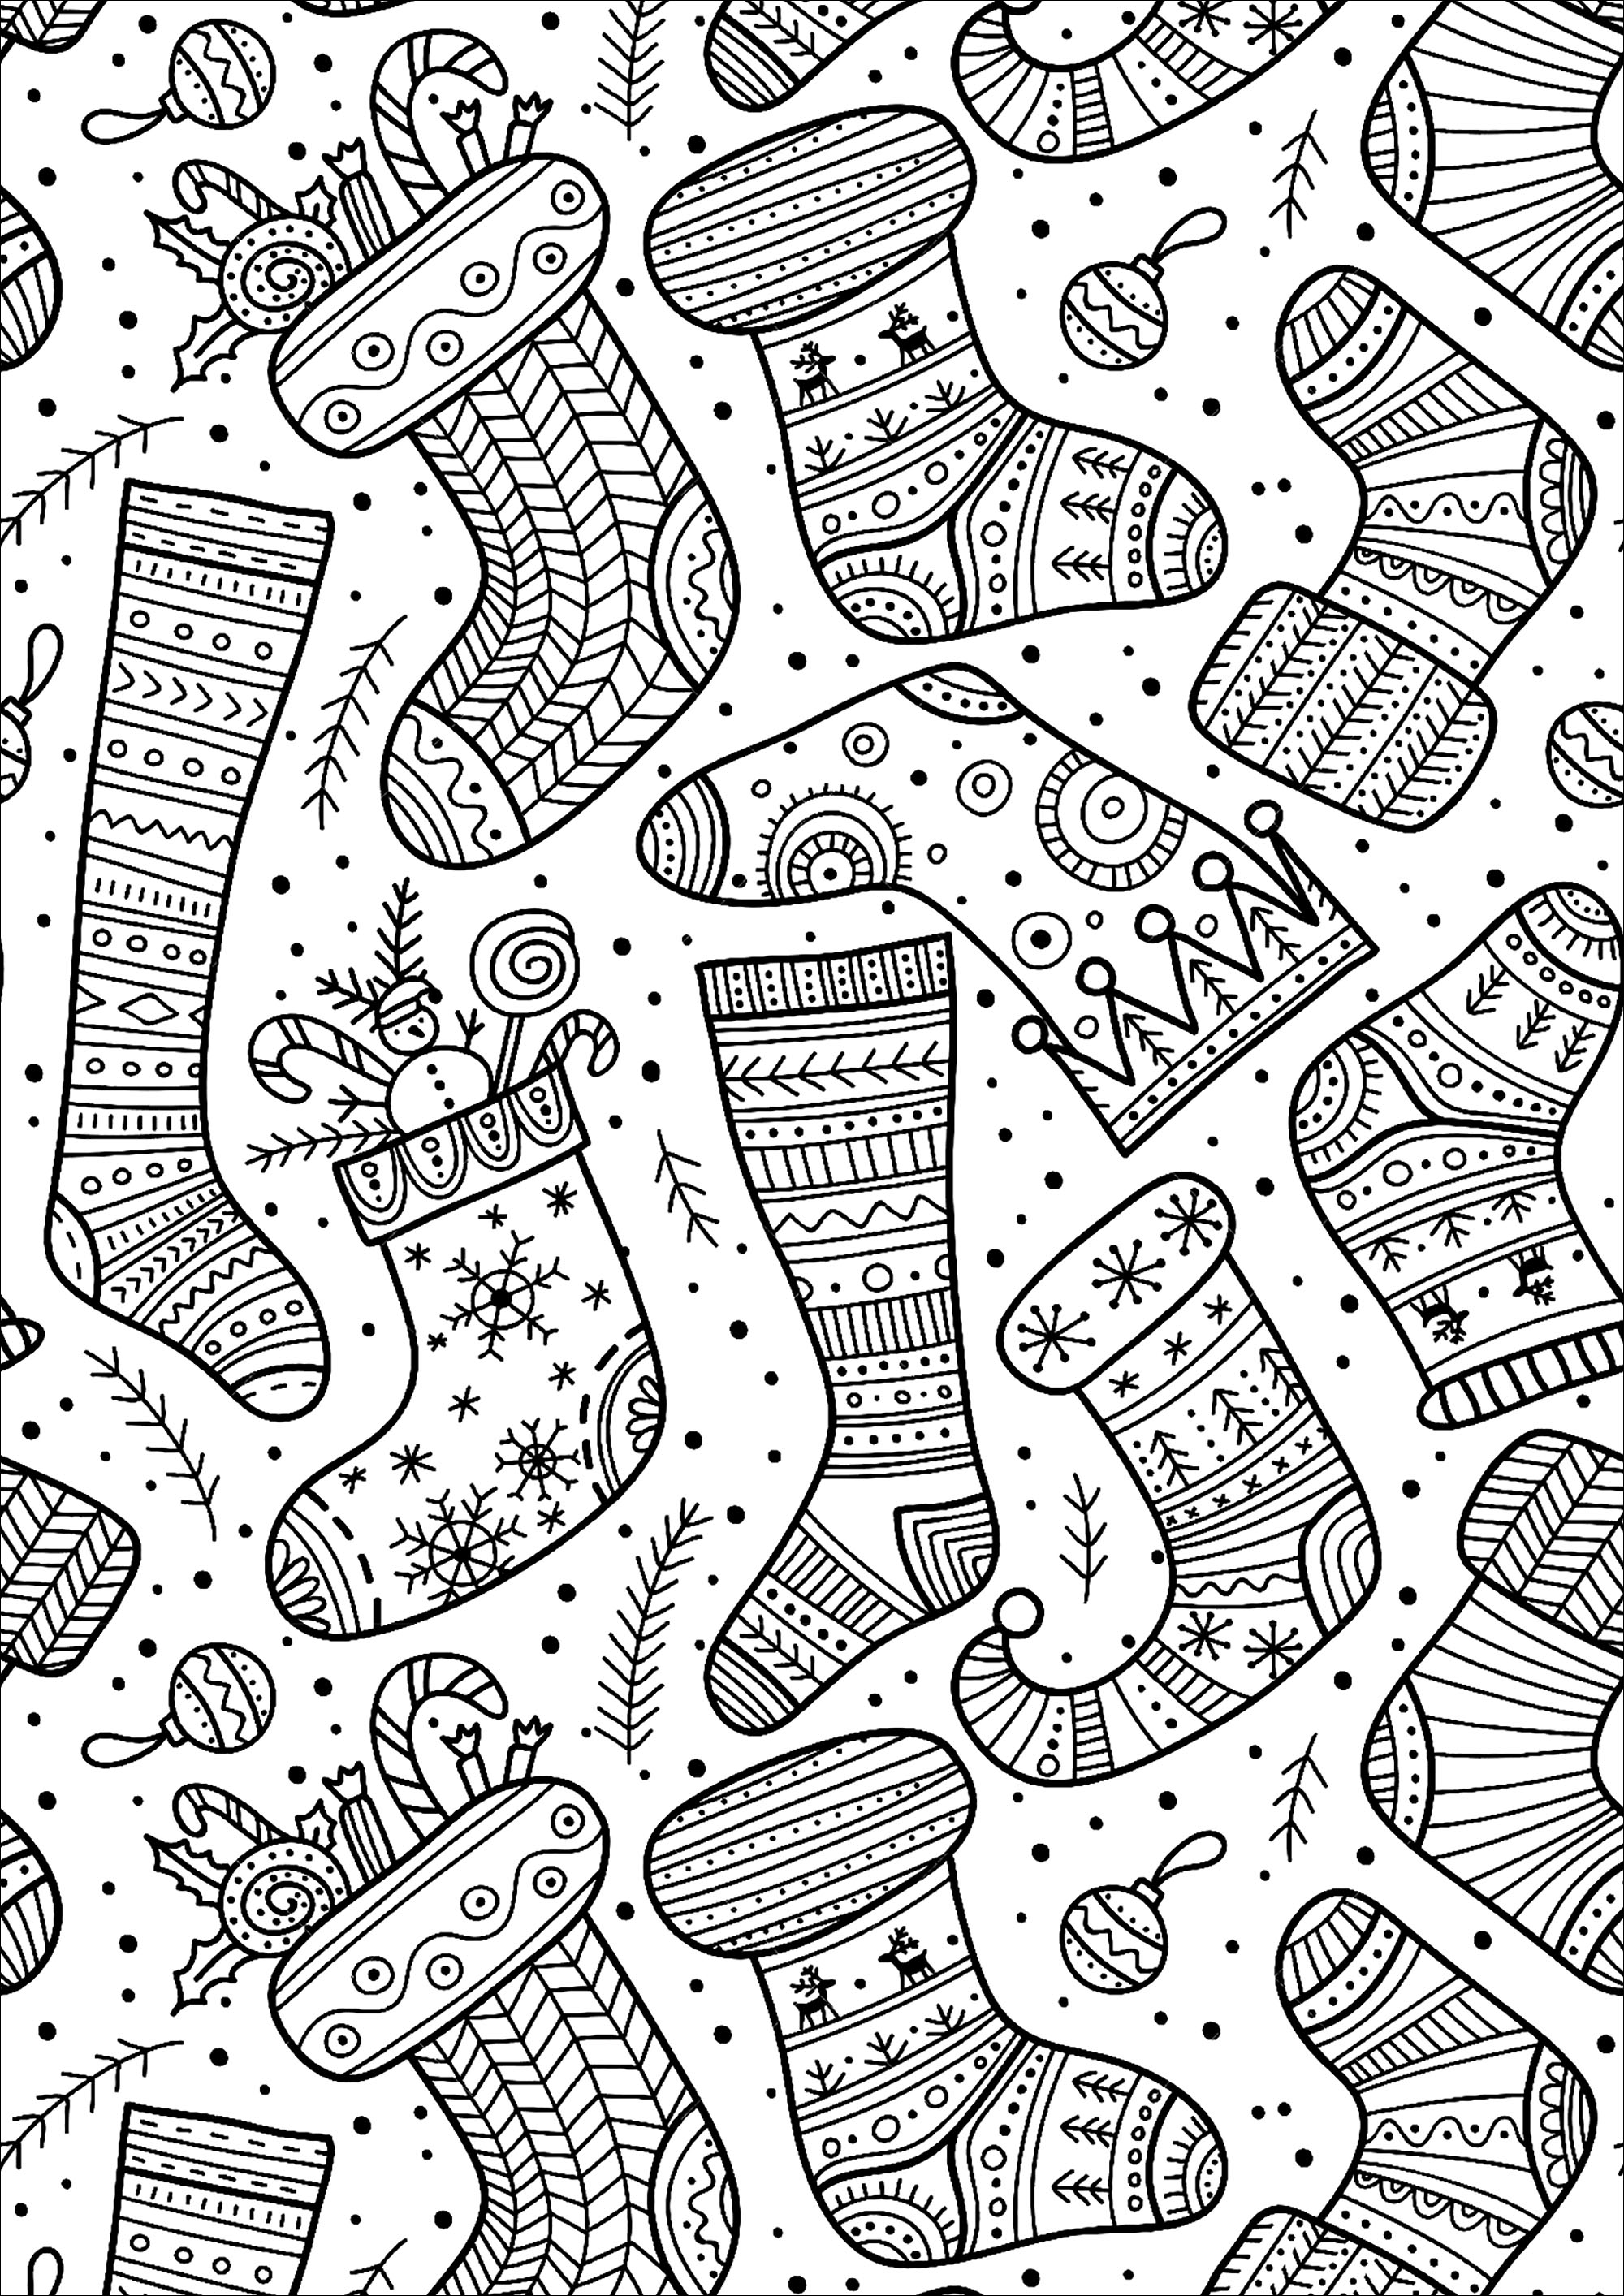 socks coloring pages